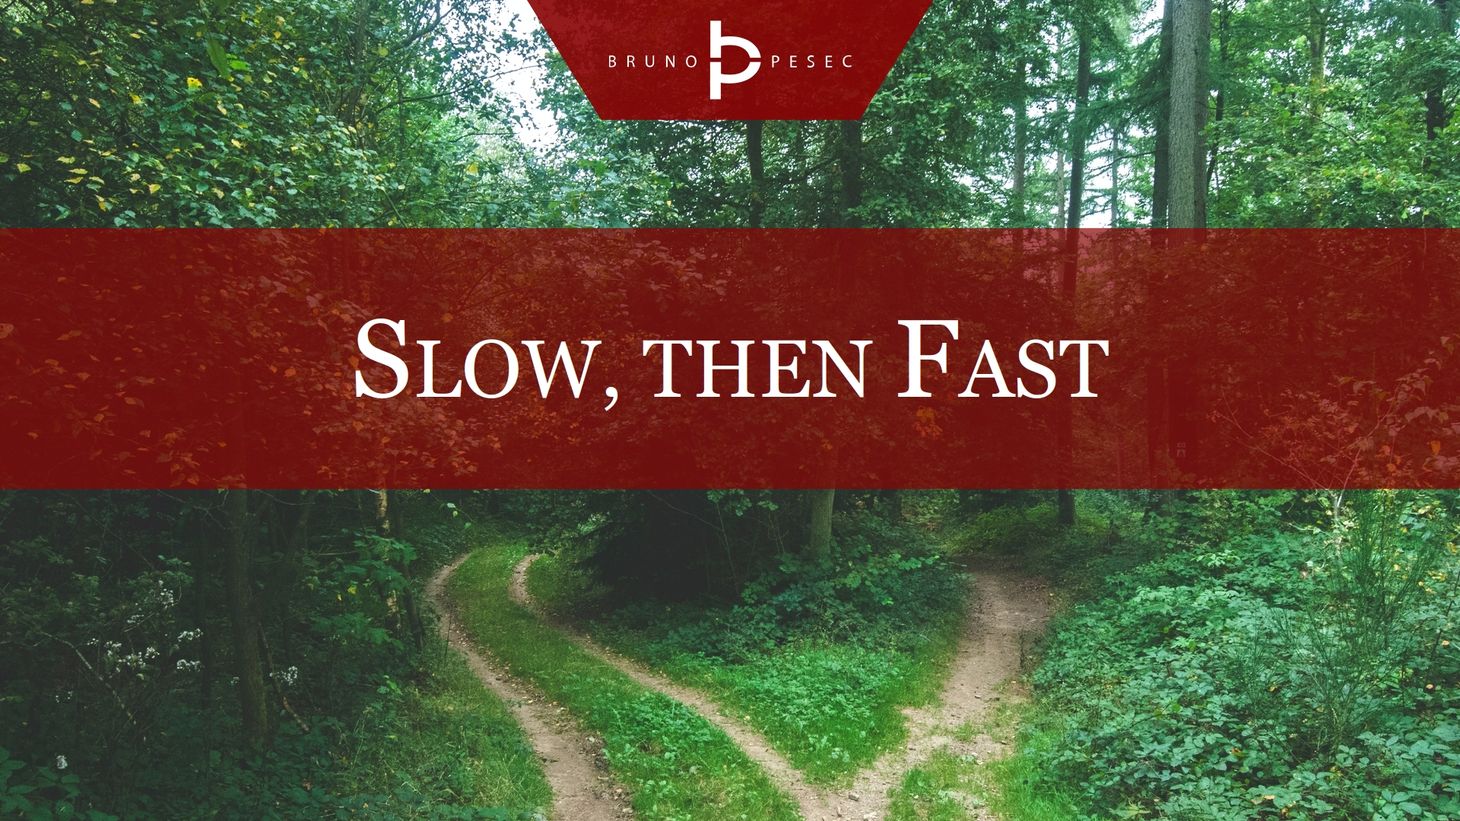 Slow, then fast